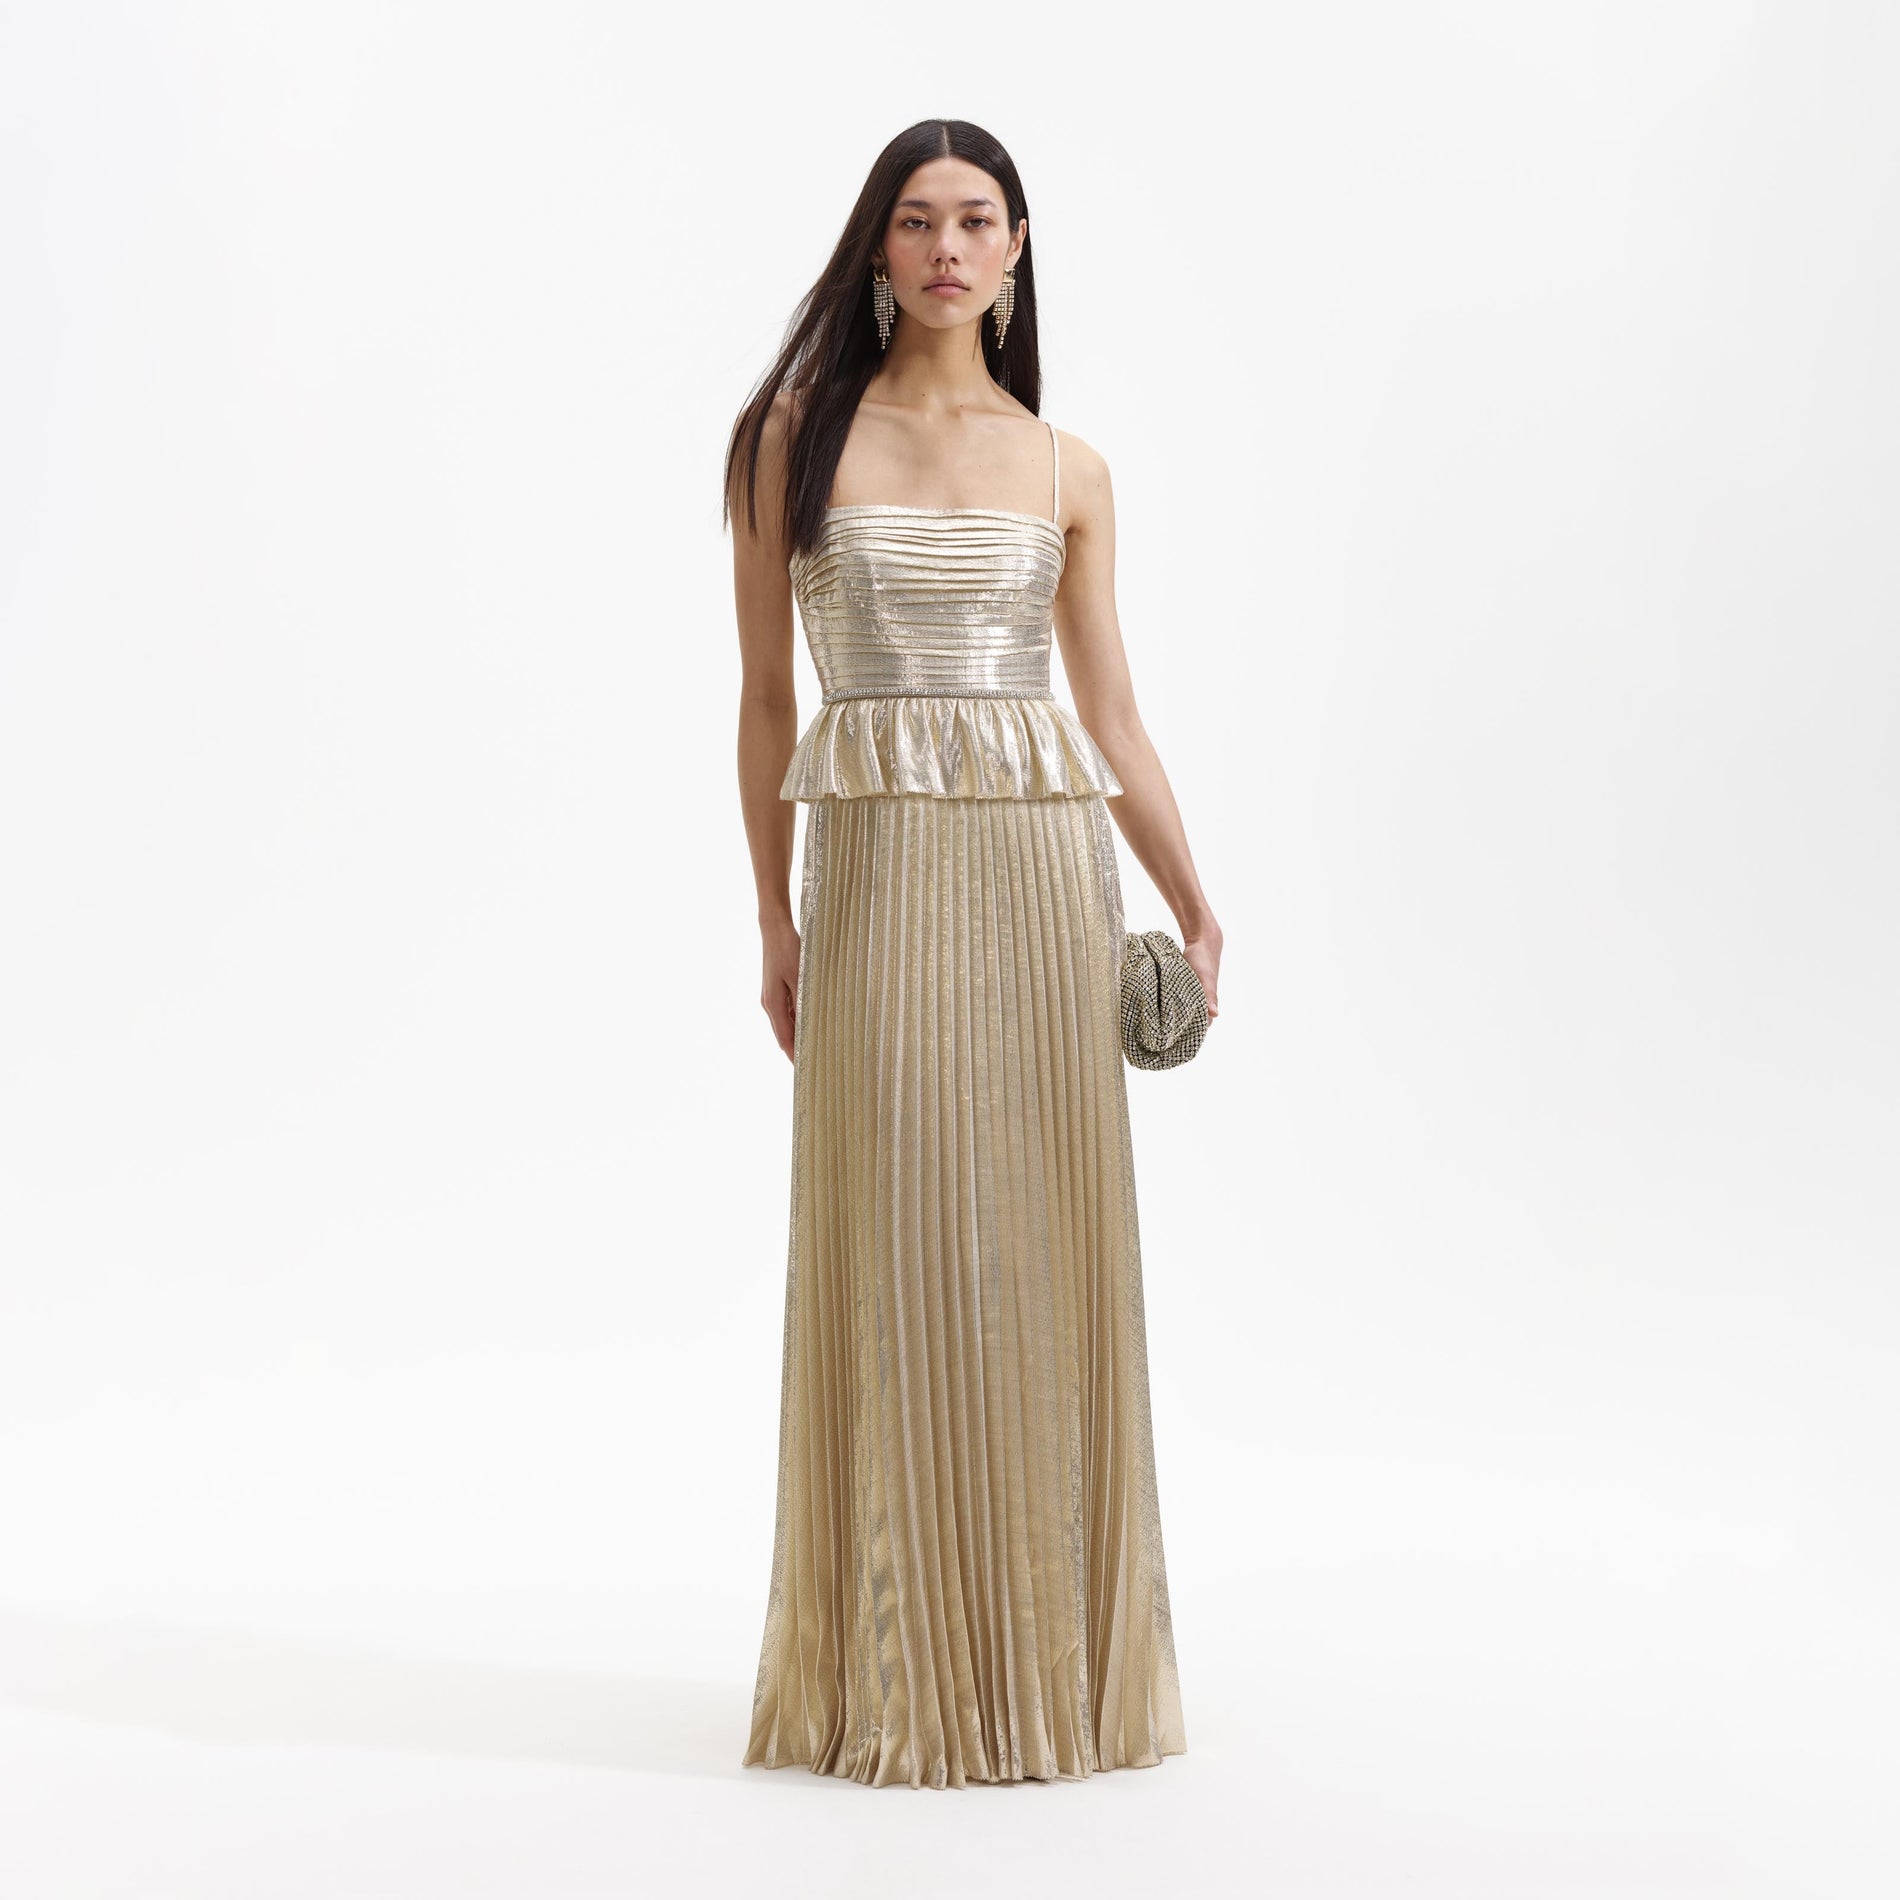 Pleated Dress - Buy Pleated Dress online in India